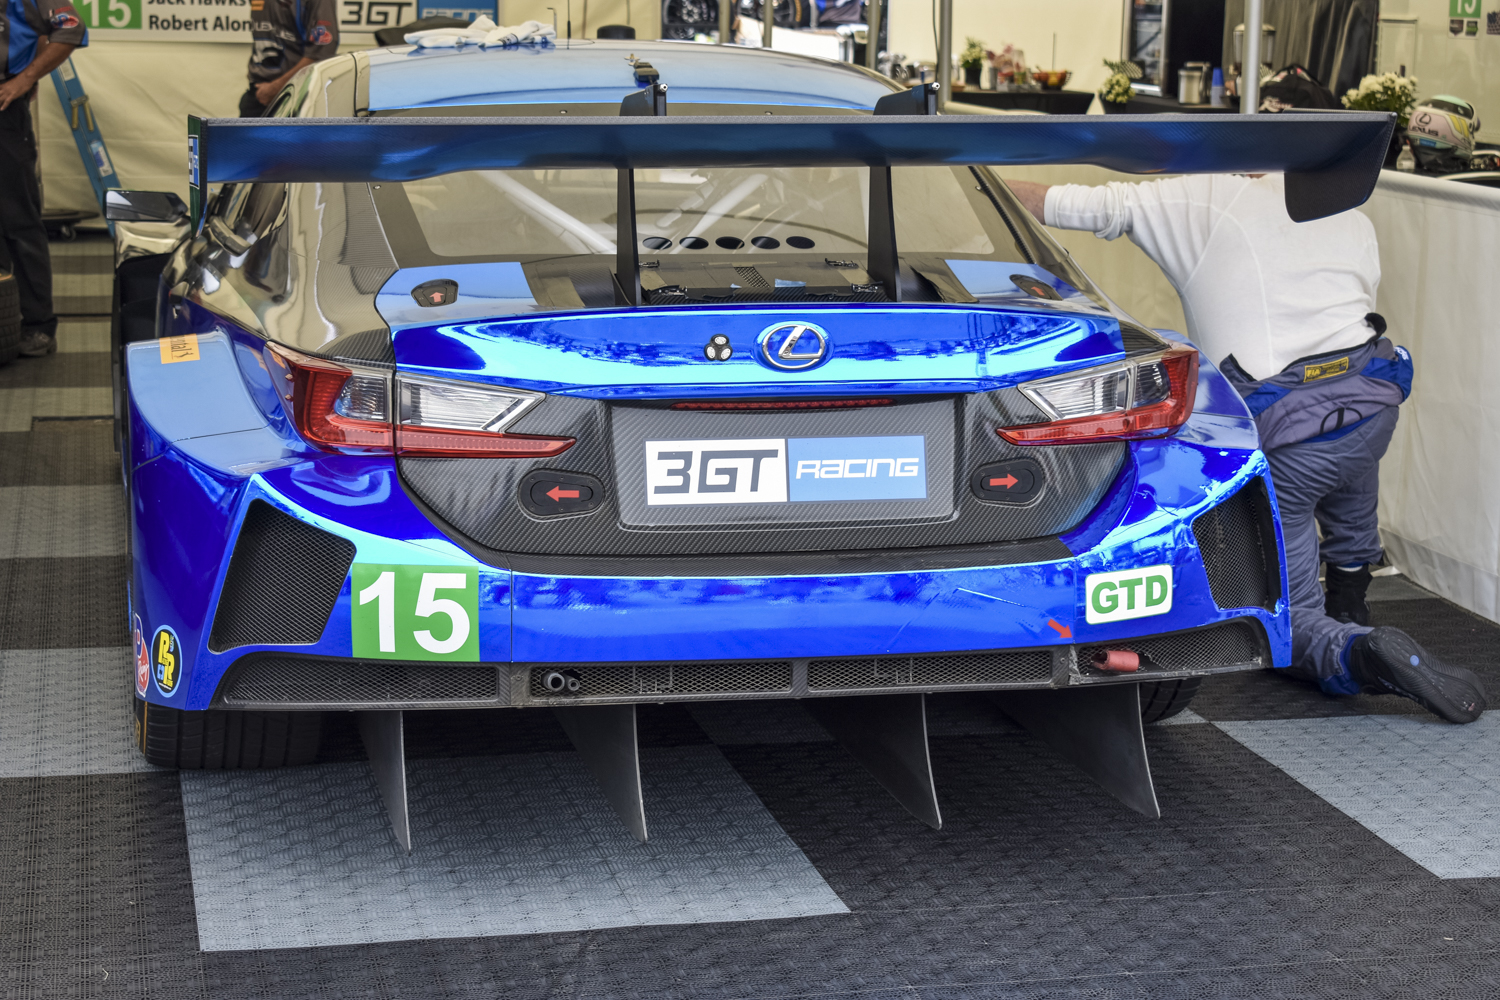 Backside of the Lexus RC F GT3 showing off the spoiler